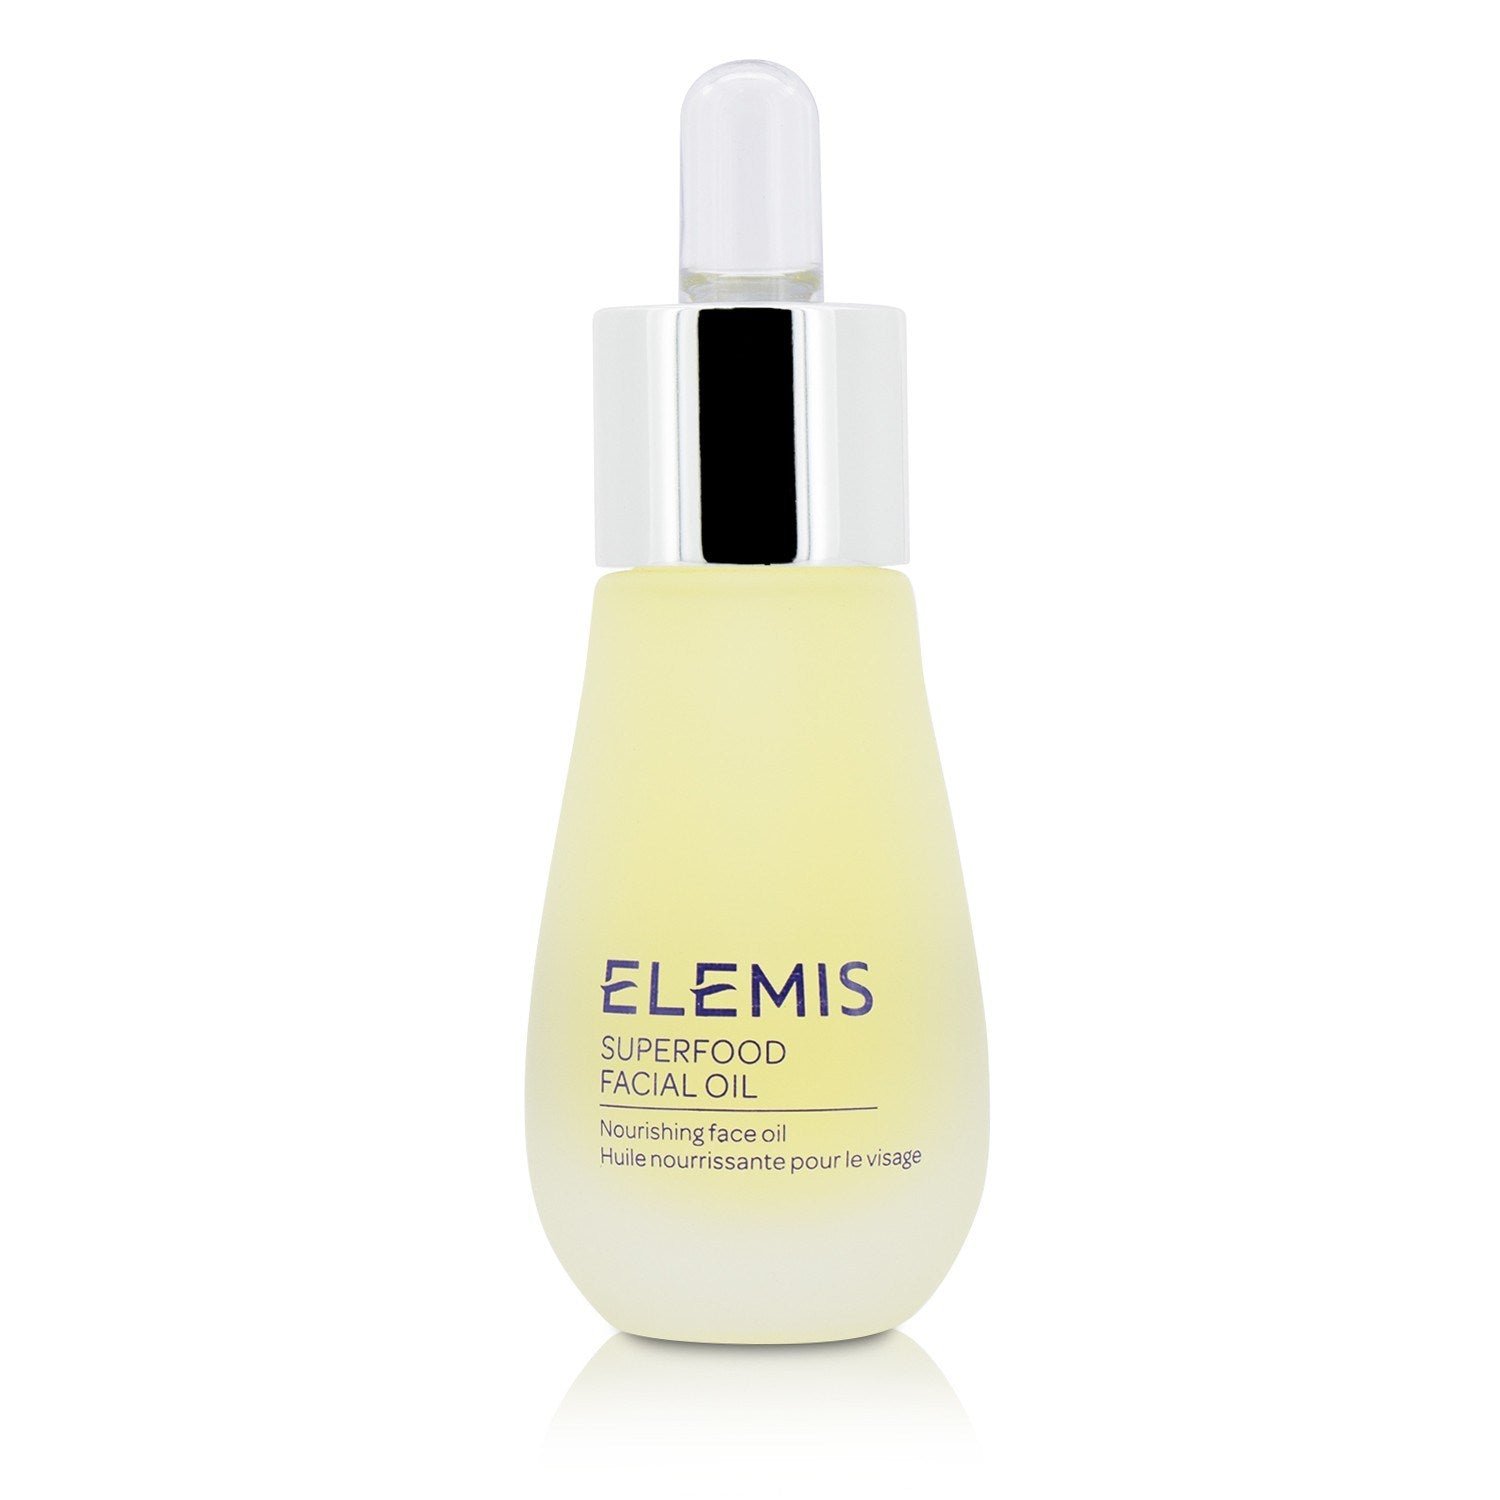 Elemis - Superfood Facial Oil - 15ml/0.5oz StrawberryNet is a nourishing facial oil treatment that deeply hydrates the skin.